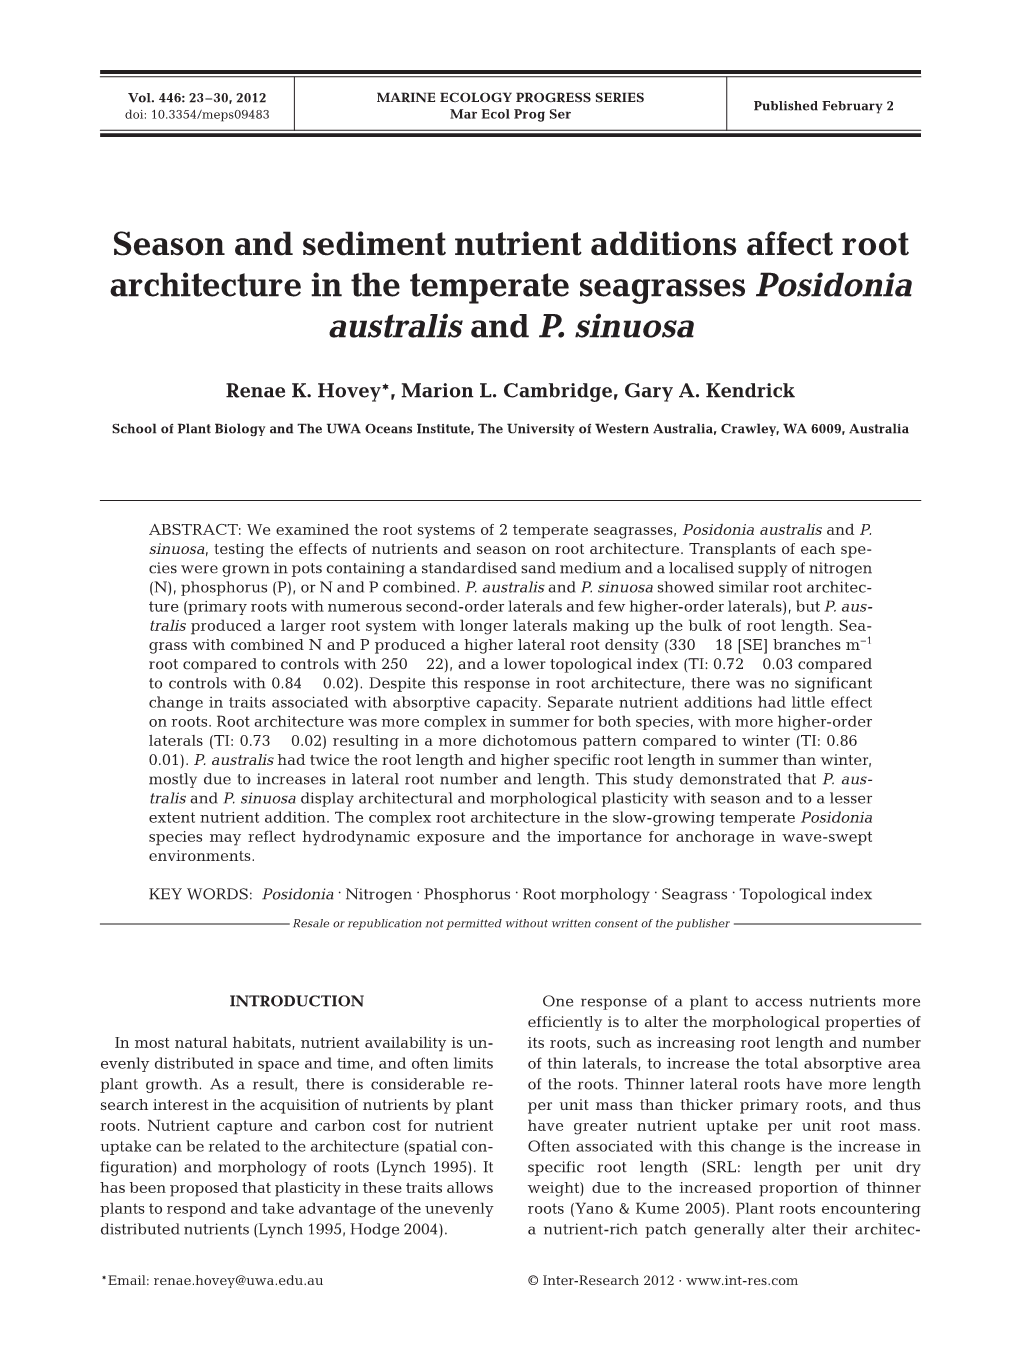 Season and Sediment Nutrient Additions Affect Root Architecture in the Temperate Seagrasses Posidonia Australis and P